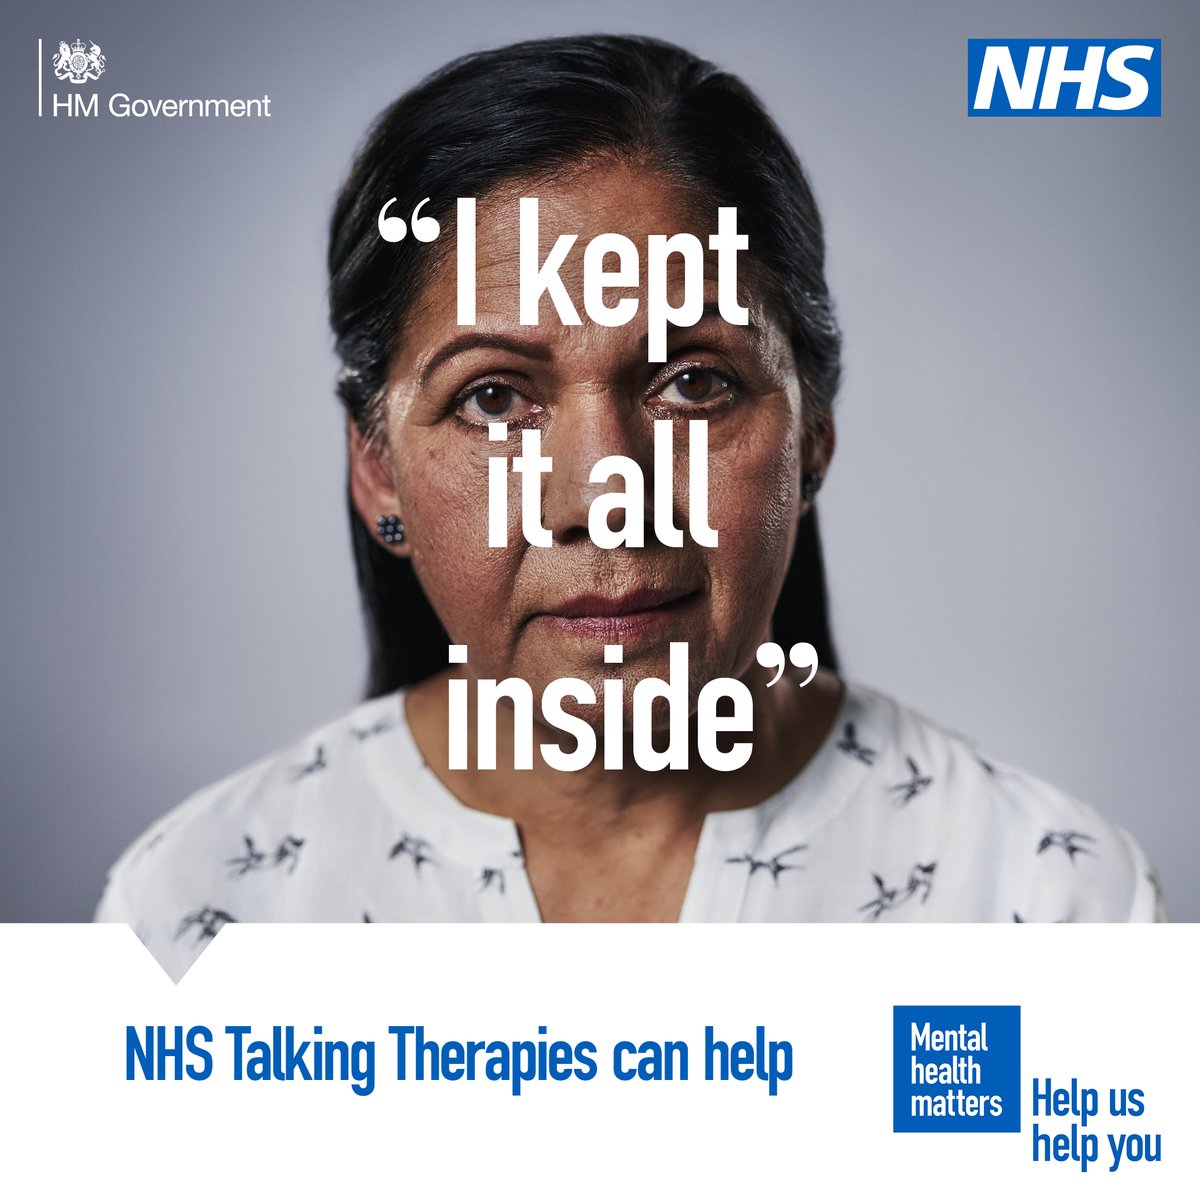 Struggling with feelings of depression, excessive worry, social anxiety, post-traumatic stress or obsessions and compulsions? NHS Talking Therapies can help. The service is effective, confidential and free. Your GP can refer you or refer yourself at nhs.uk/talk